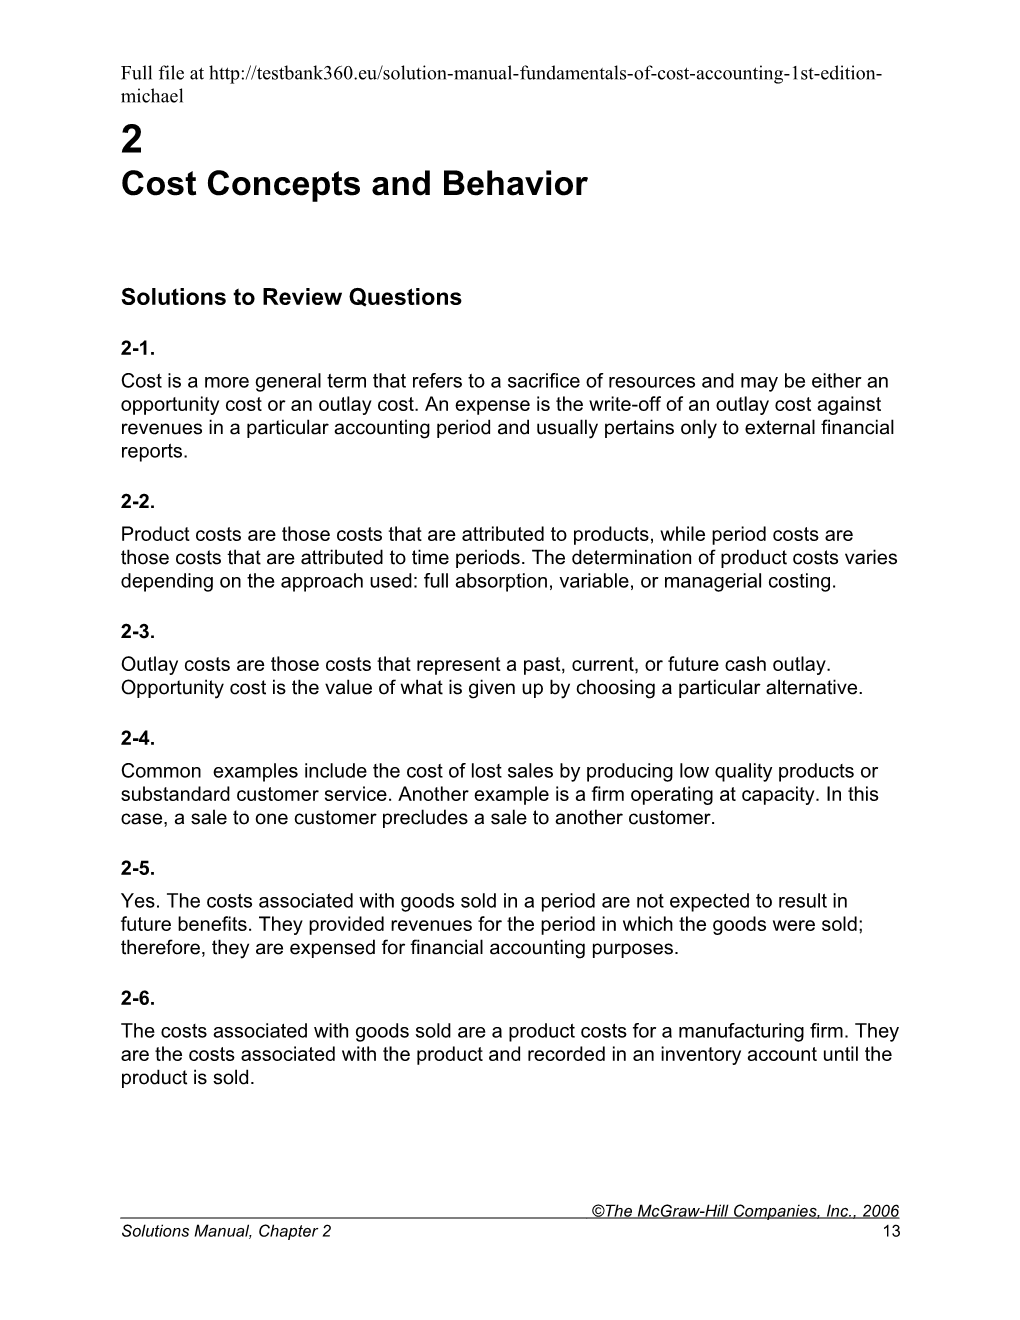 Cost Concepts and Behavior s2